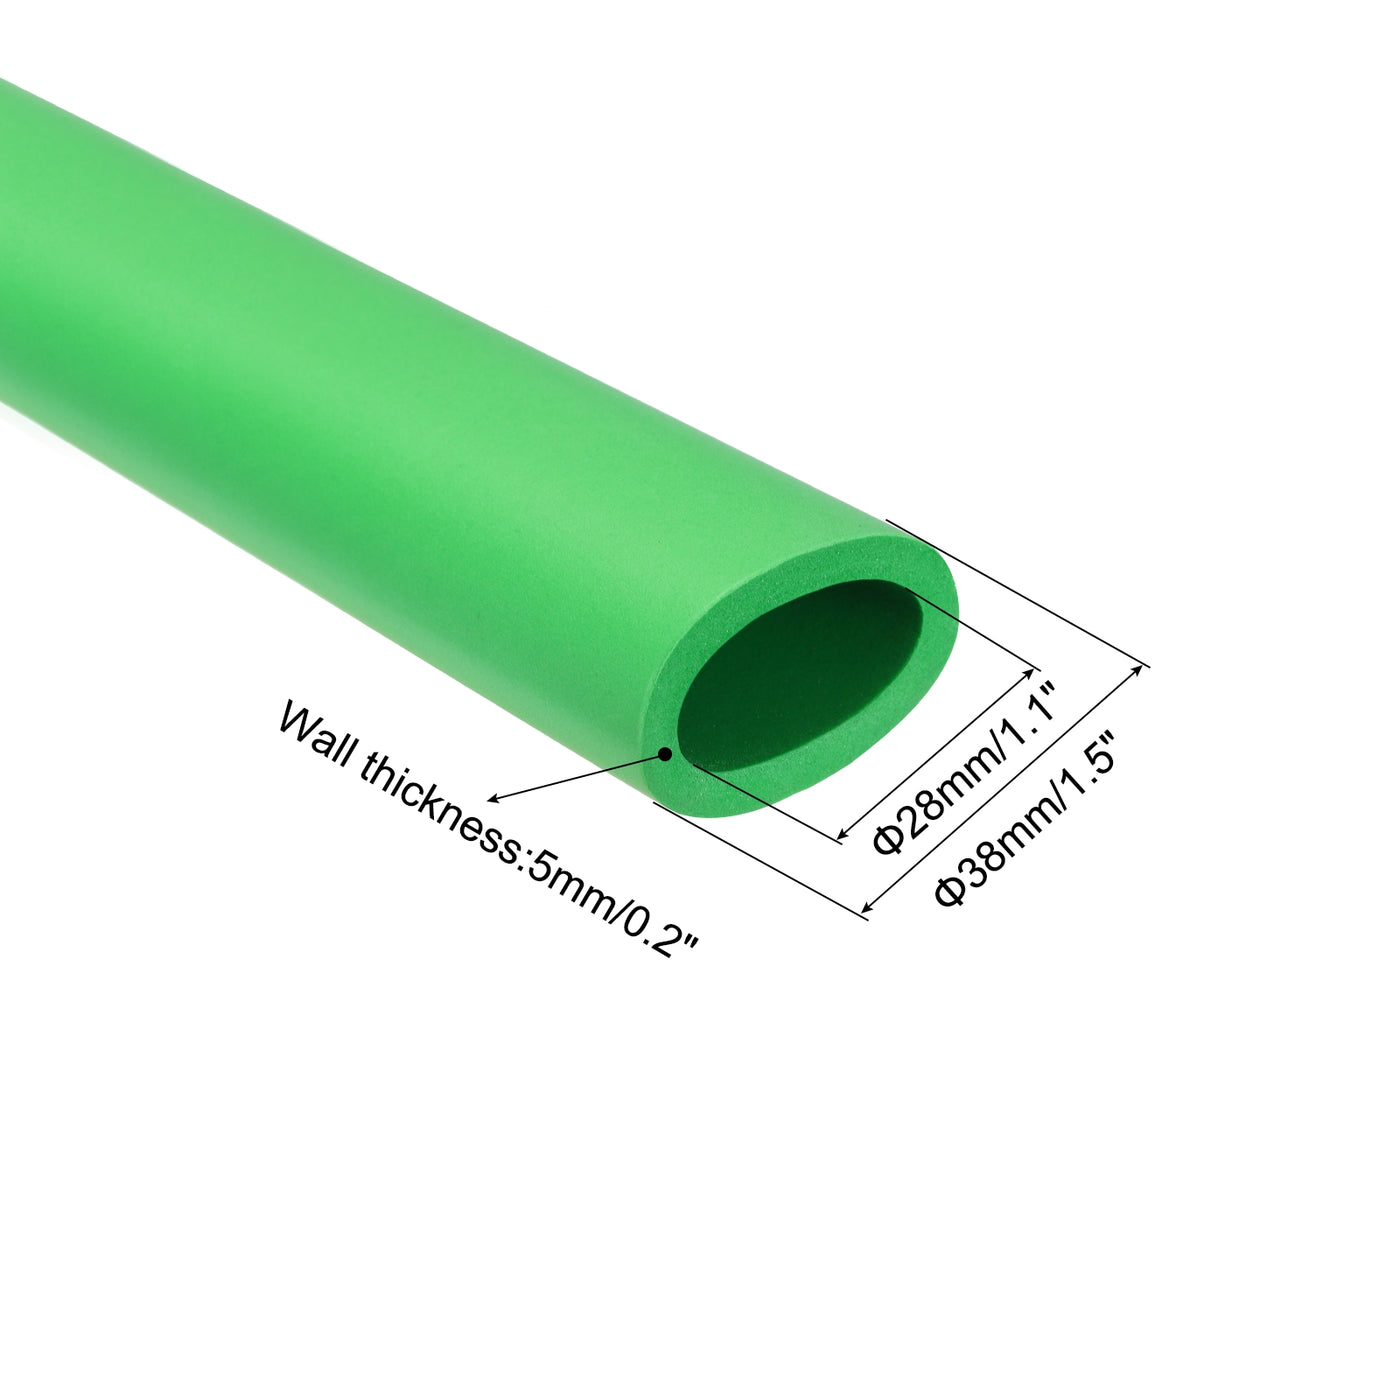 uxcell Uxcell 2pcs 3.3ft Pipe Insulation Tube 28mm ID 38mm OD Foam Tubing for Handle Grip Support, Green